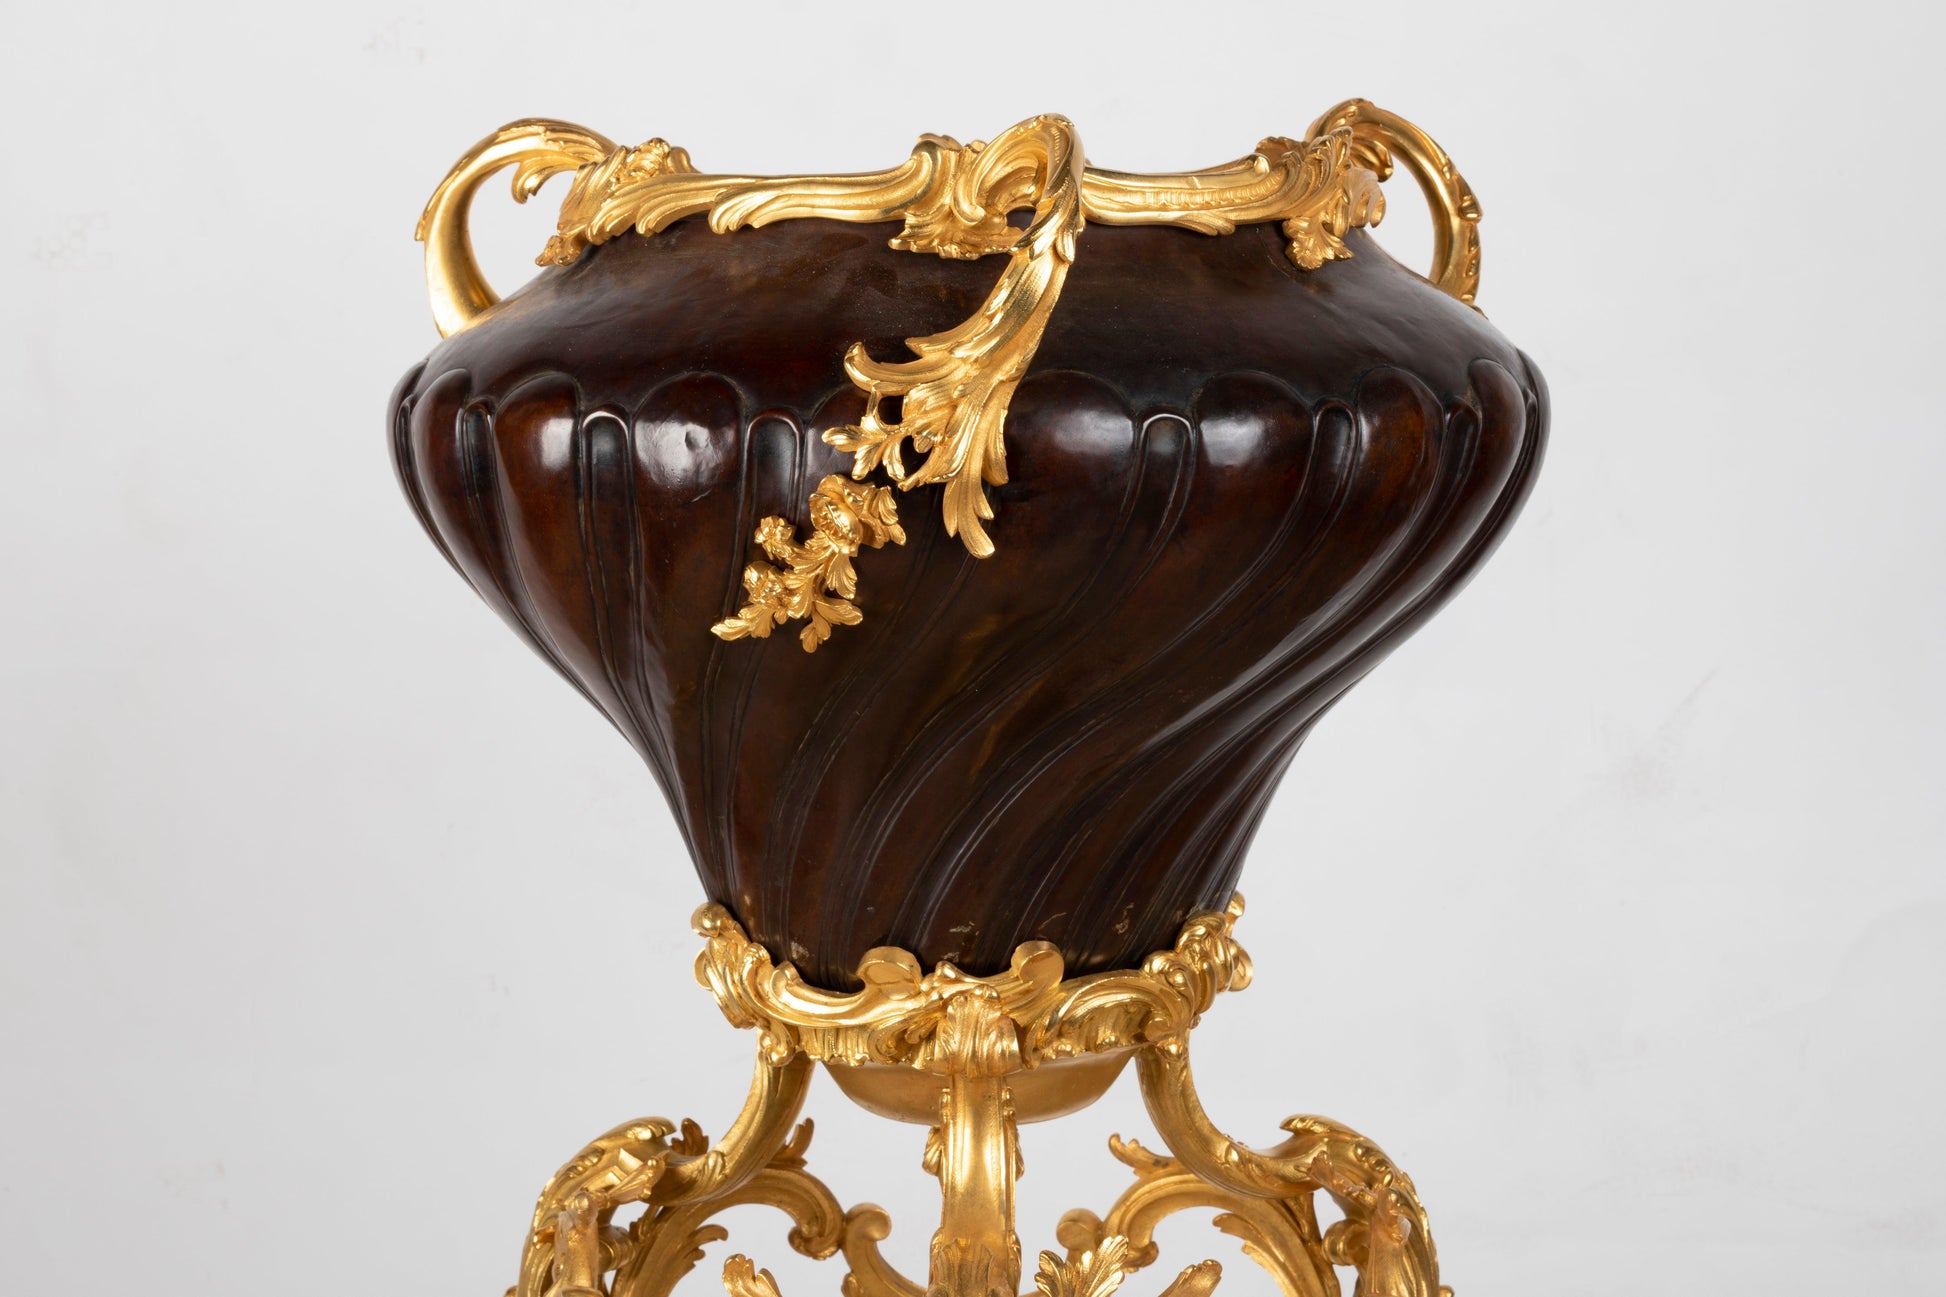 A FRENCH 19TH CENTURY GILT AND PATINATED BRONZE JARDINIERE ON STAND SIGNED MILLET. - Galerie Rosiers